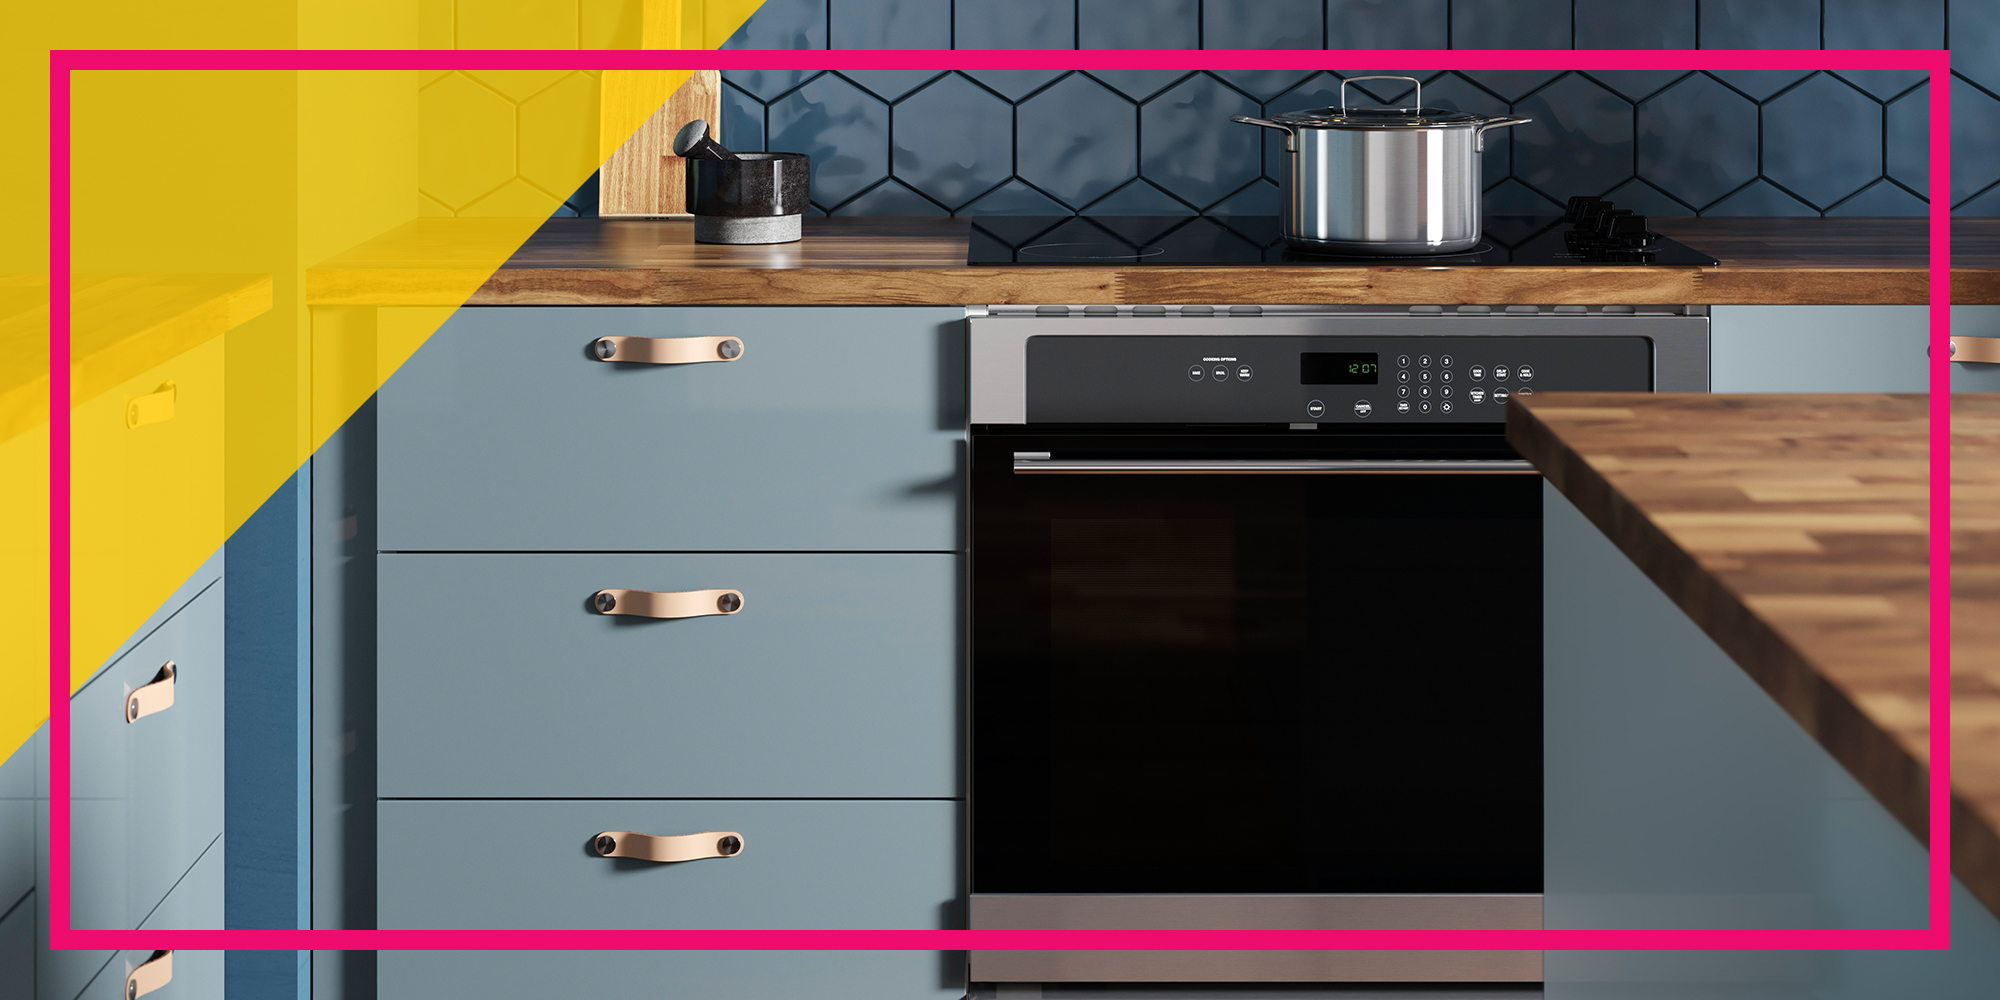 Ikea Kitchen Inspiration How To Choose A New Oven